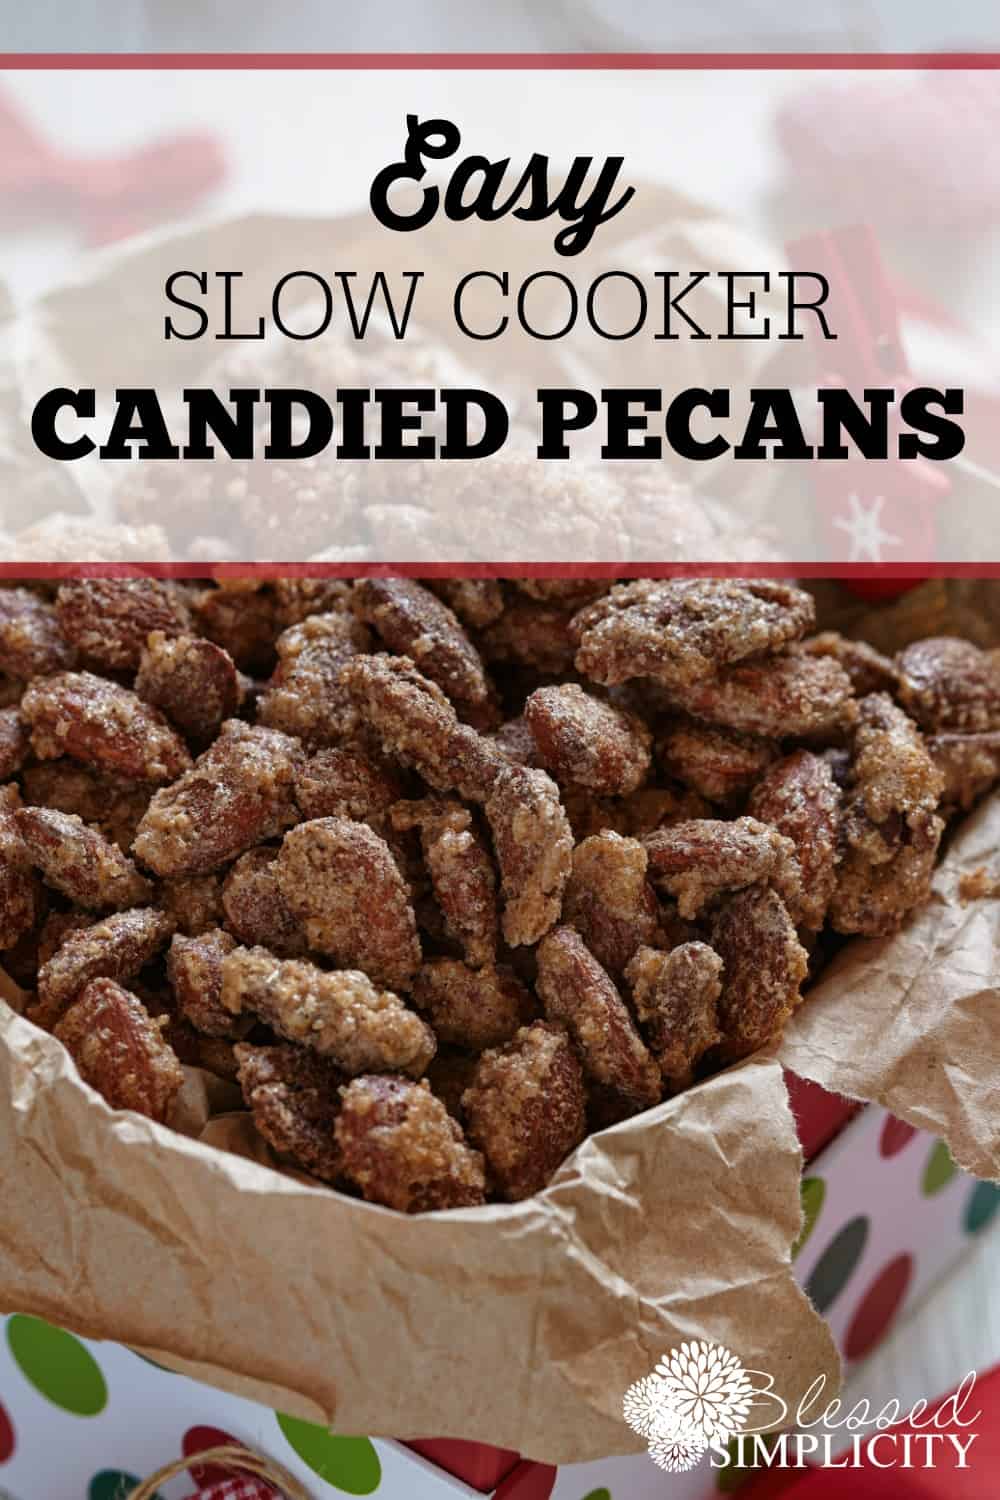 These delicious candied pecans are made in the slow cooker. They are perfect for gift giving and making the house smell like Christmas!